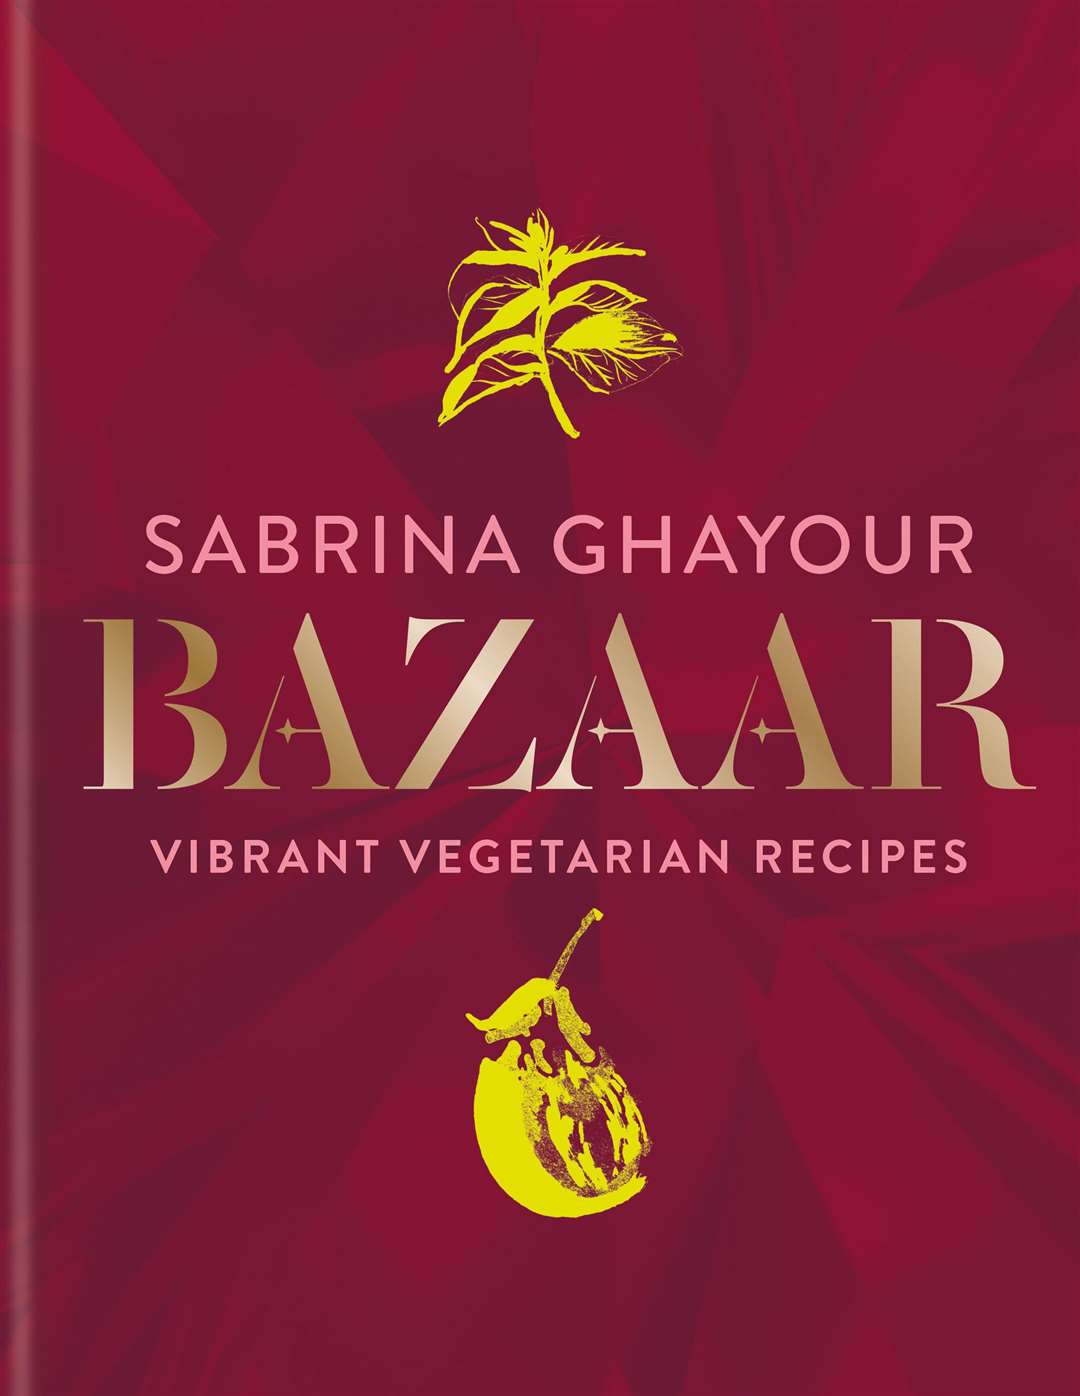 Bazaar: Vibrant Vegetarian and Plant-based Recipes by Sabrina Ghayour, is published by Mitchell Beazley. priced £26. Available now (octopusbooks.co.uk). Picture: Kris Kirkham/PA